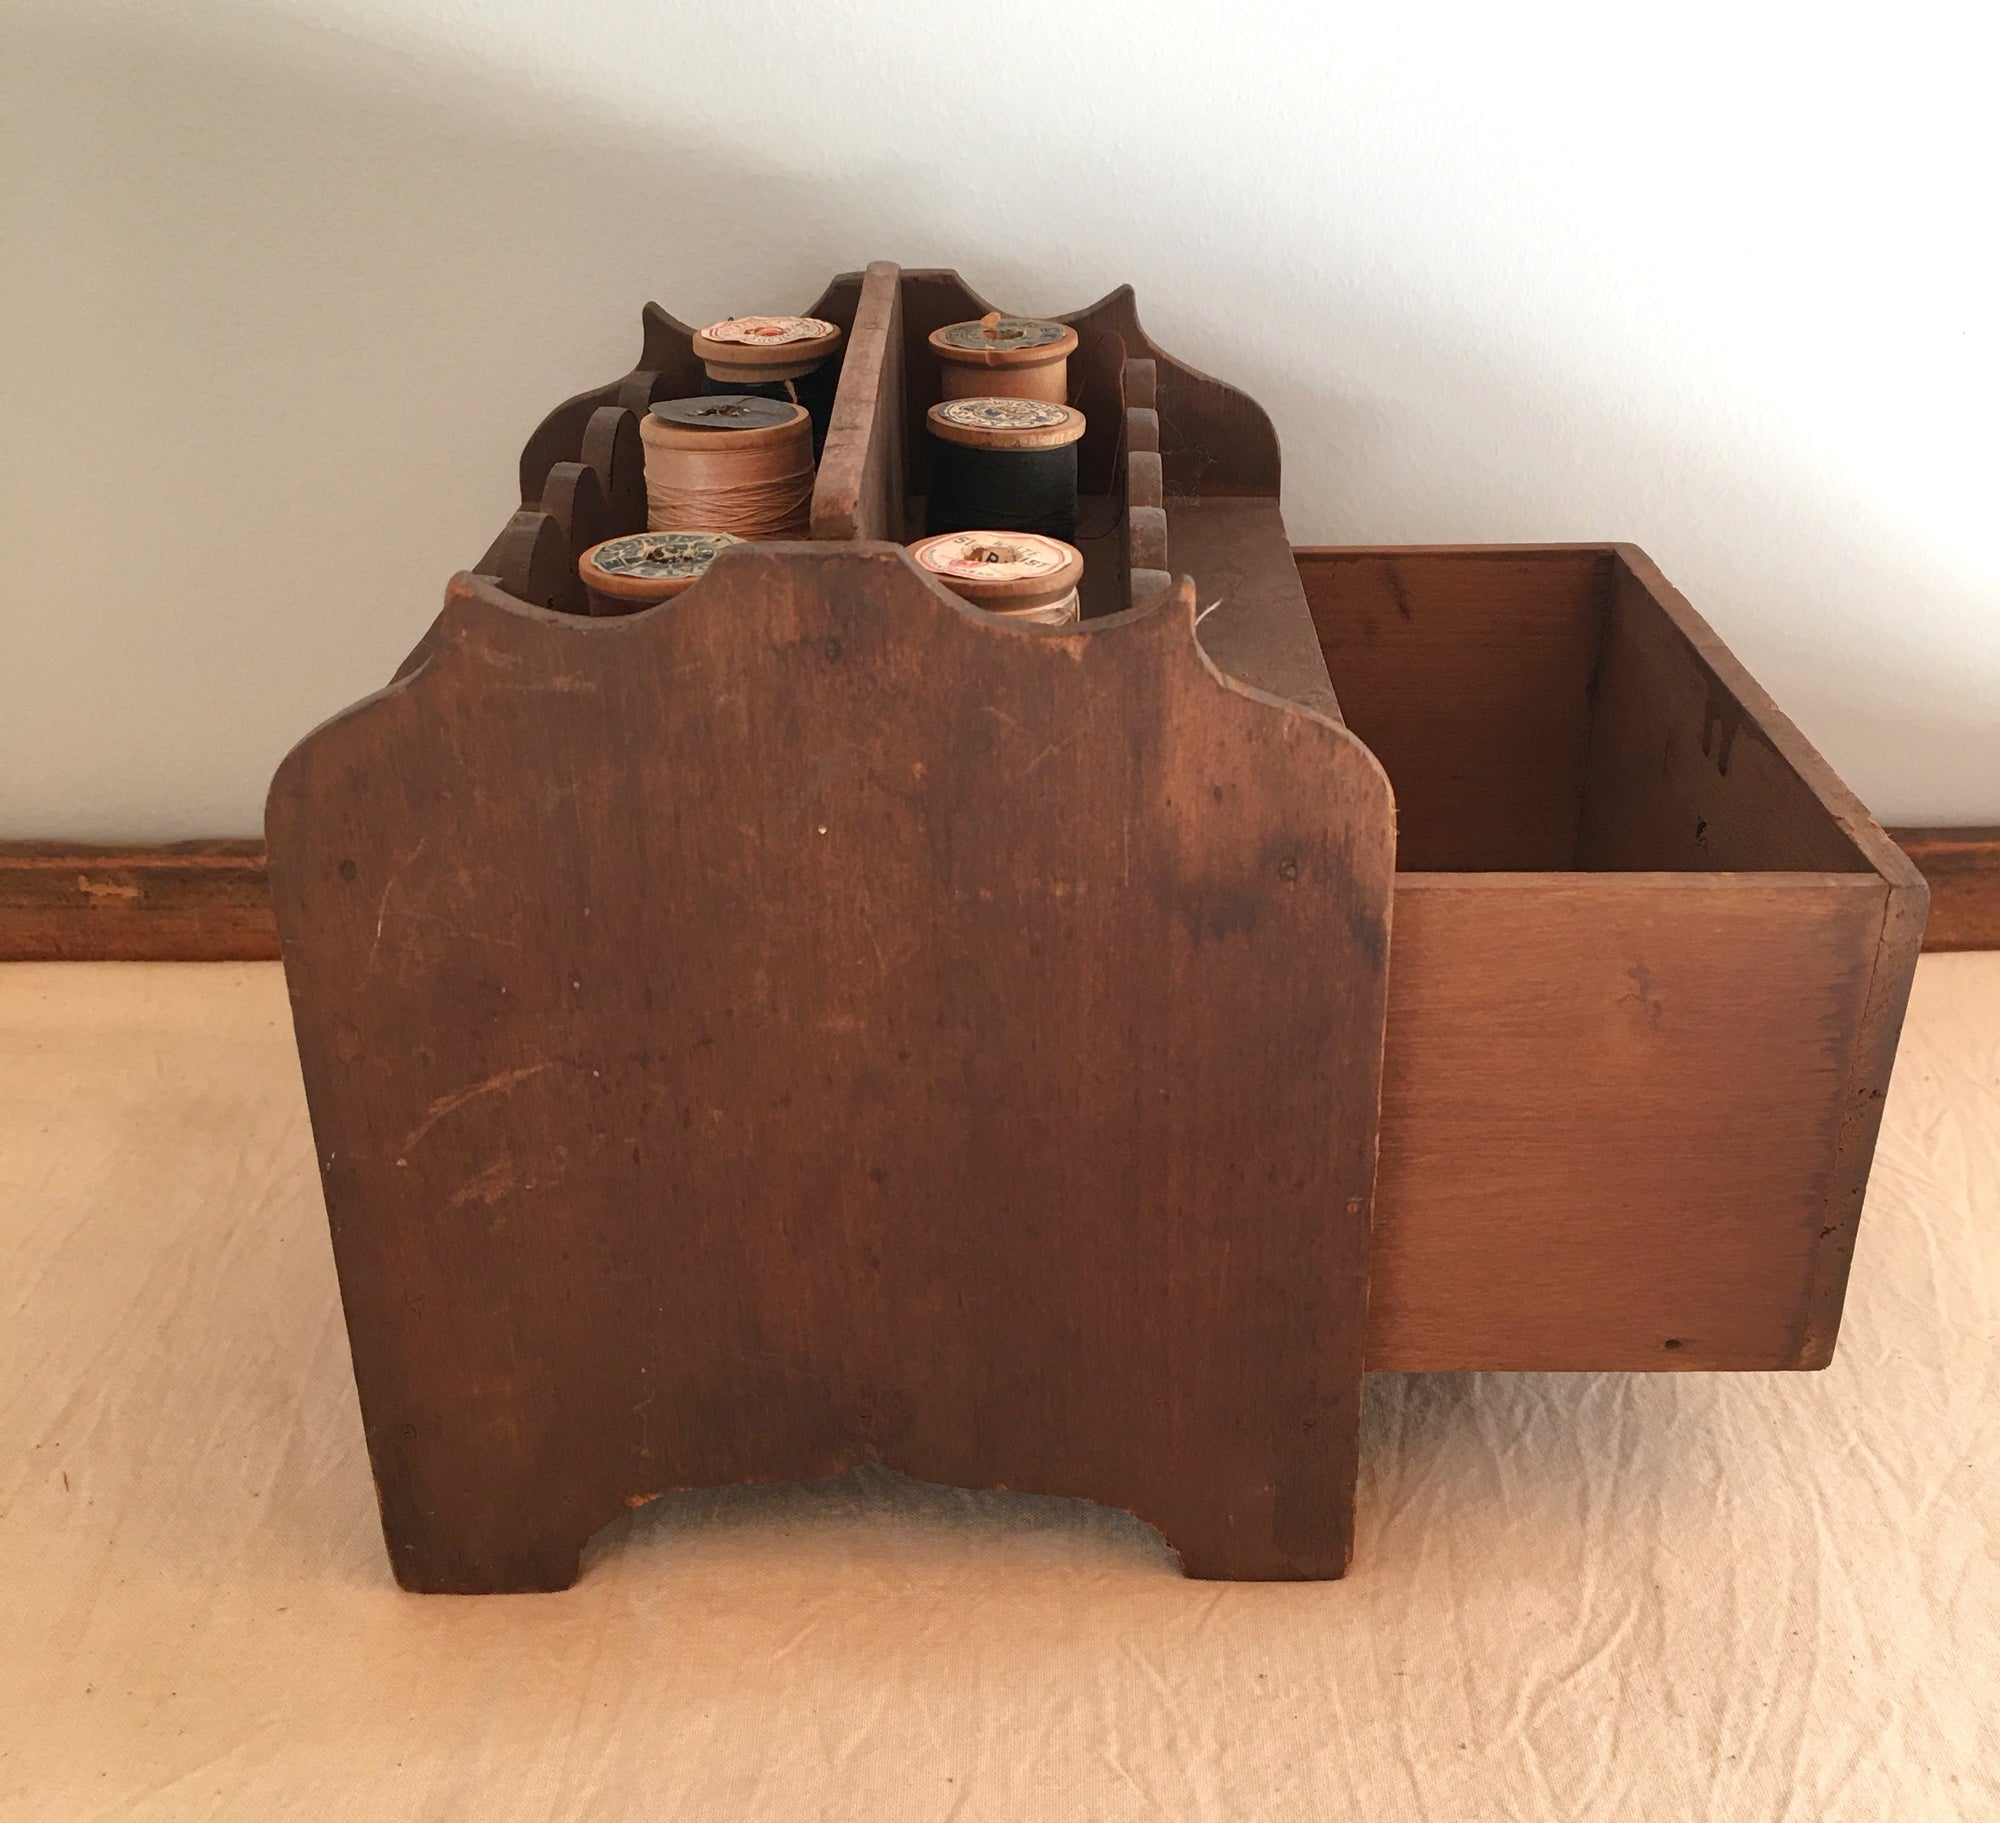 Vintage Sewing Box with Spools Holders